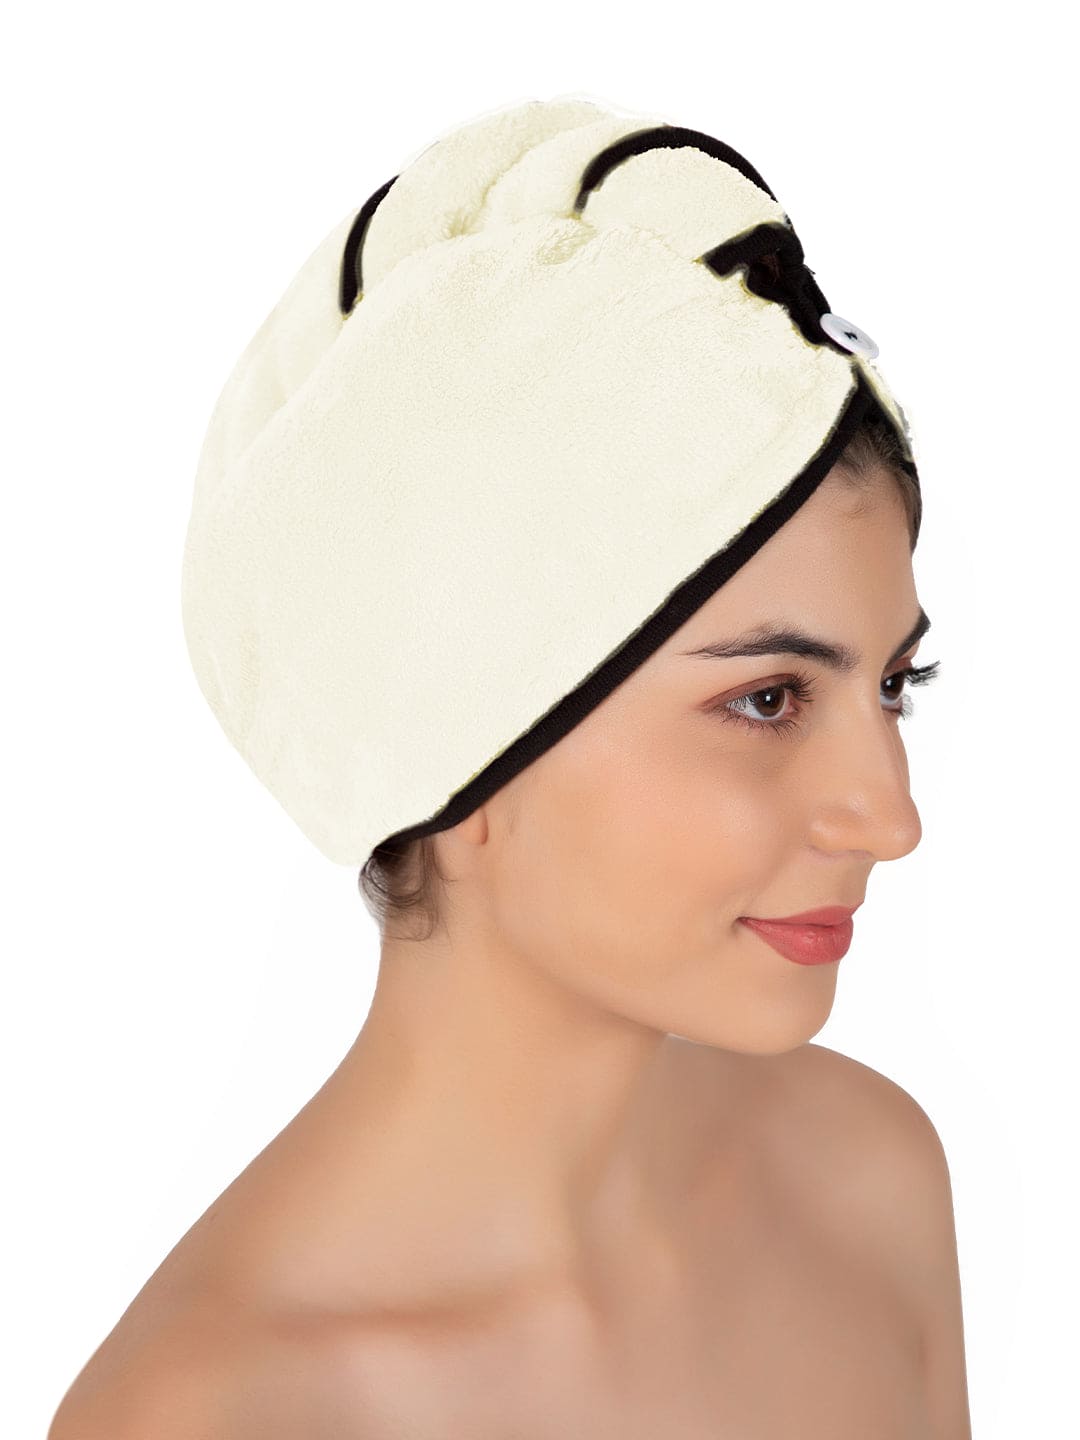 SOFTSPUN Microfiber Hair Cap 1 Pcs 70X25 cm 280 GSM Super Absorbent Quick Dry Hair Turban for Drying All Kinds of Hair Straight or Curly Short or Long Thin or Thick Hair.